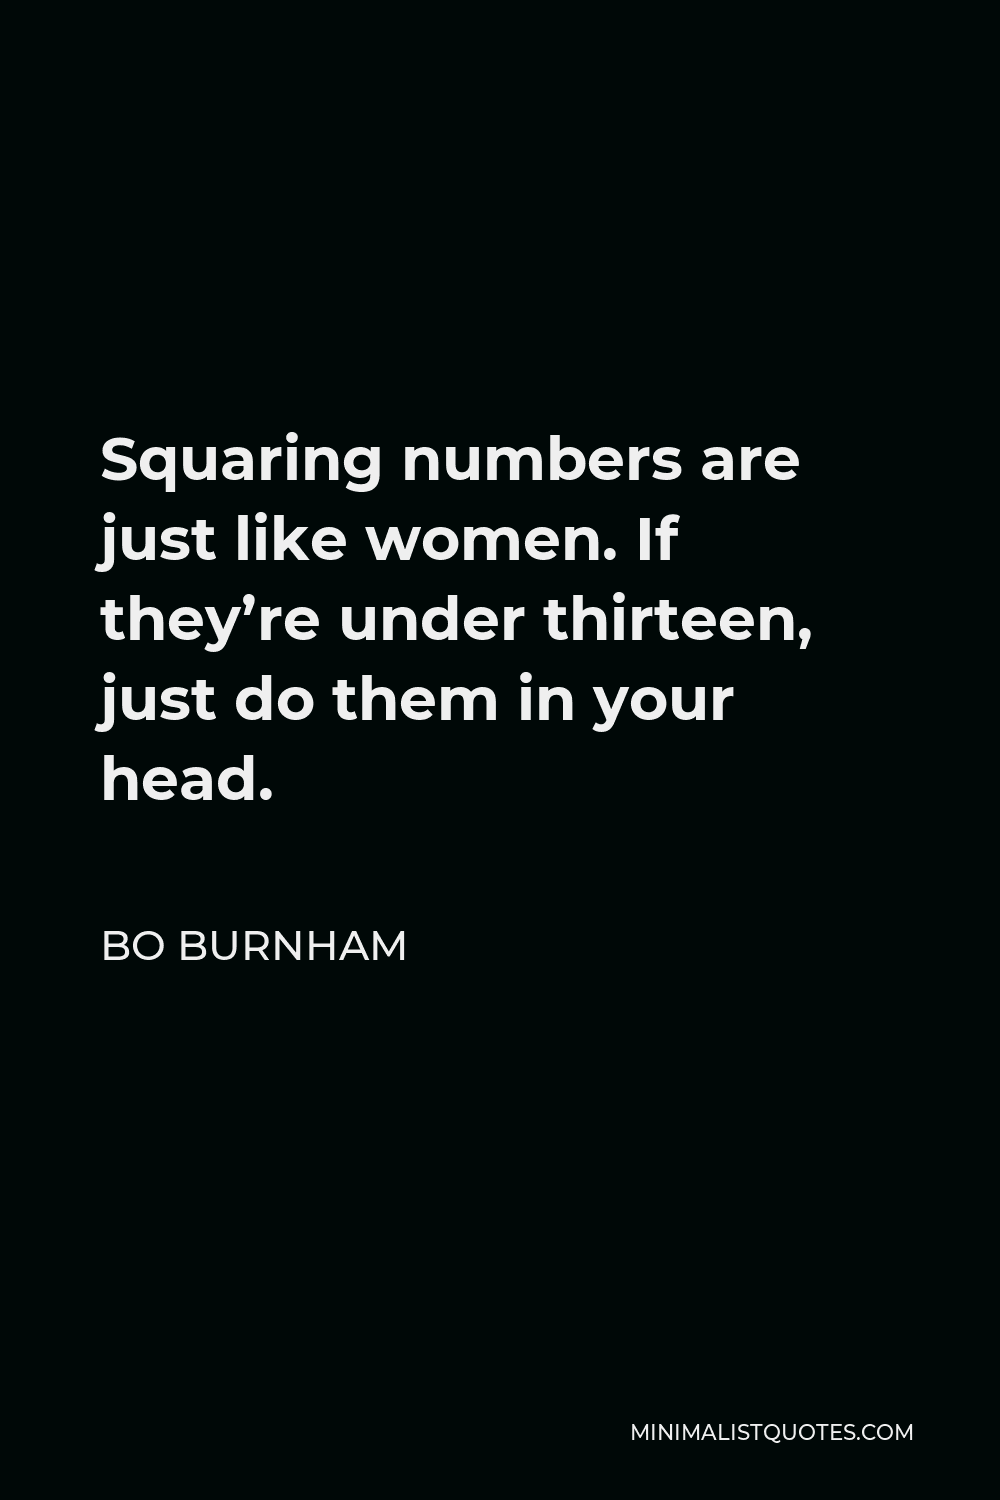 Bo Burnham Quote - Squaring numbers are just like women. If they’re under thirteen, just do them in your head.